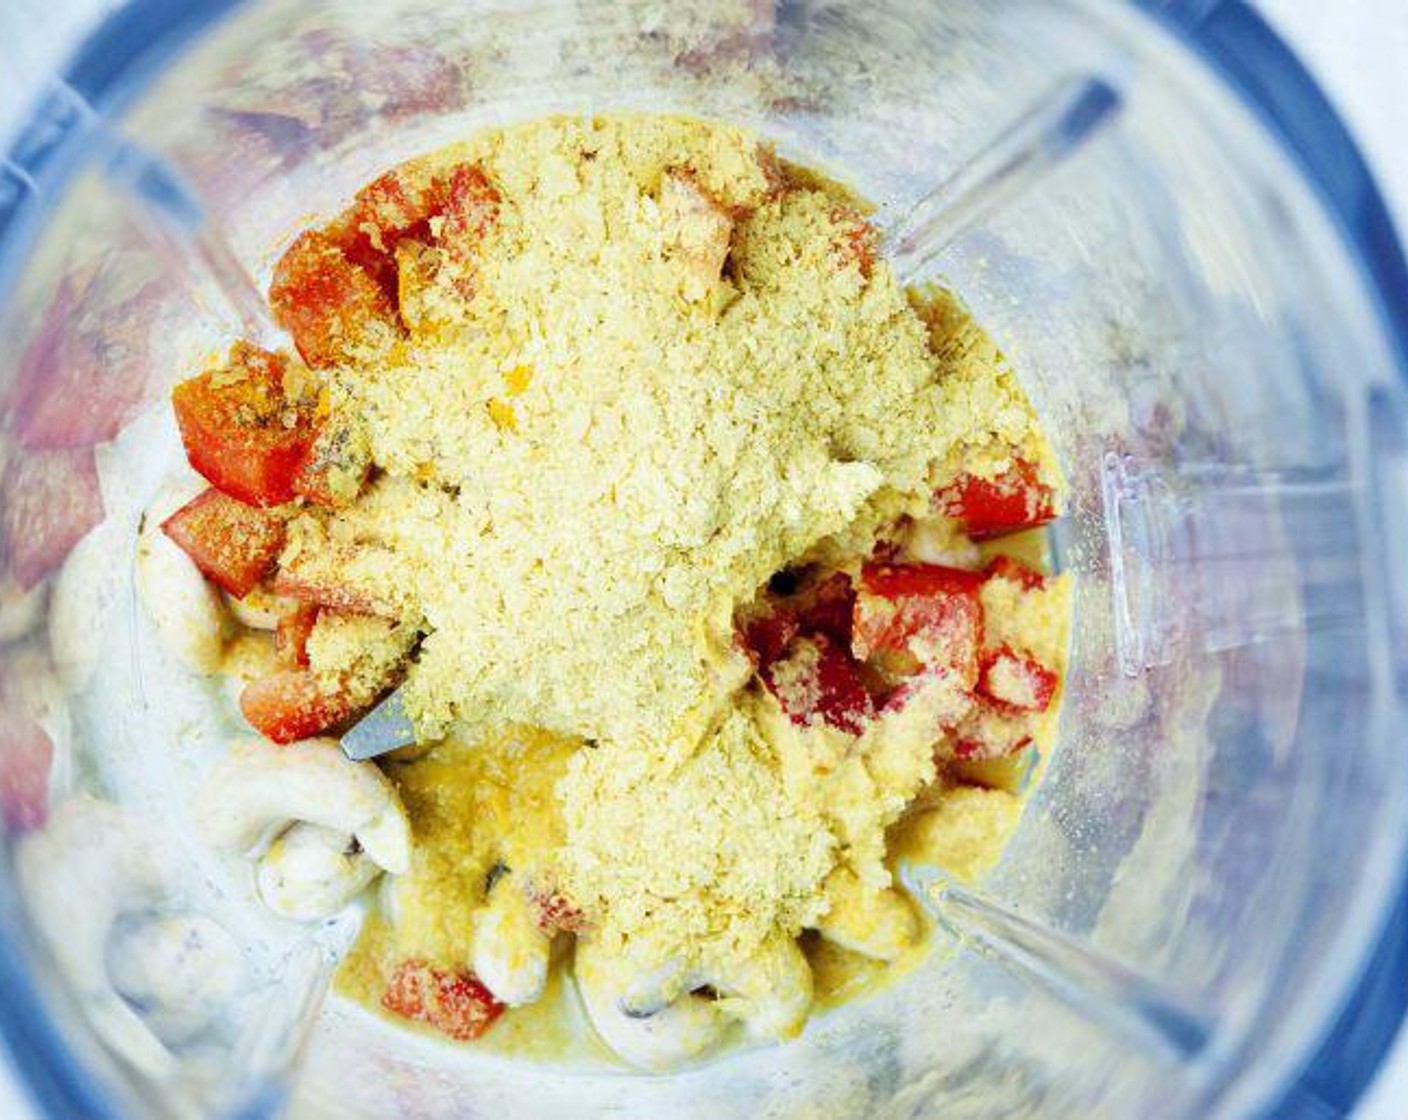 step 3 Place Red Bell Pepper (1/2), Onion Powder (1/2 tsp), Pink Himalayan Sea Salt (1/2 tsp), Cashew Nuts (1/2 cup), the juice from Lemon (1), Nutritional Yeast (3 Tbsp), Ground Turmeric (1 tsp), and Water (as needed) in the blender.